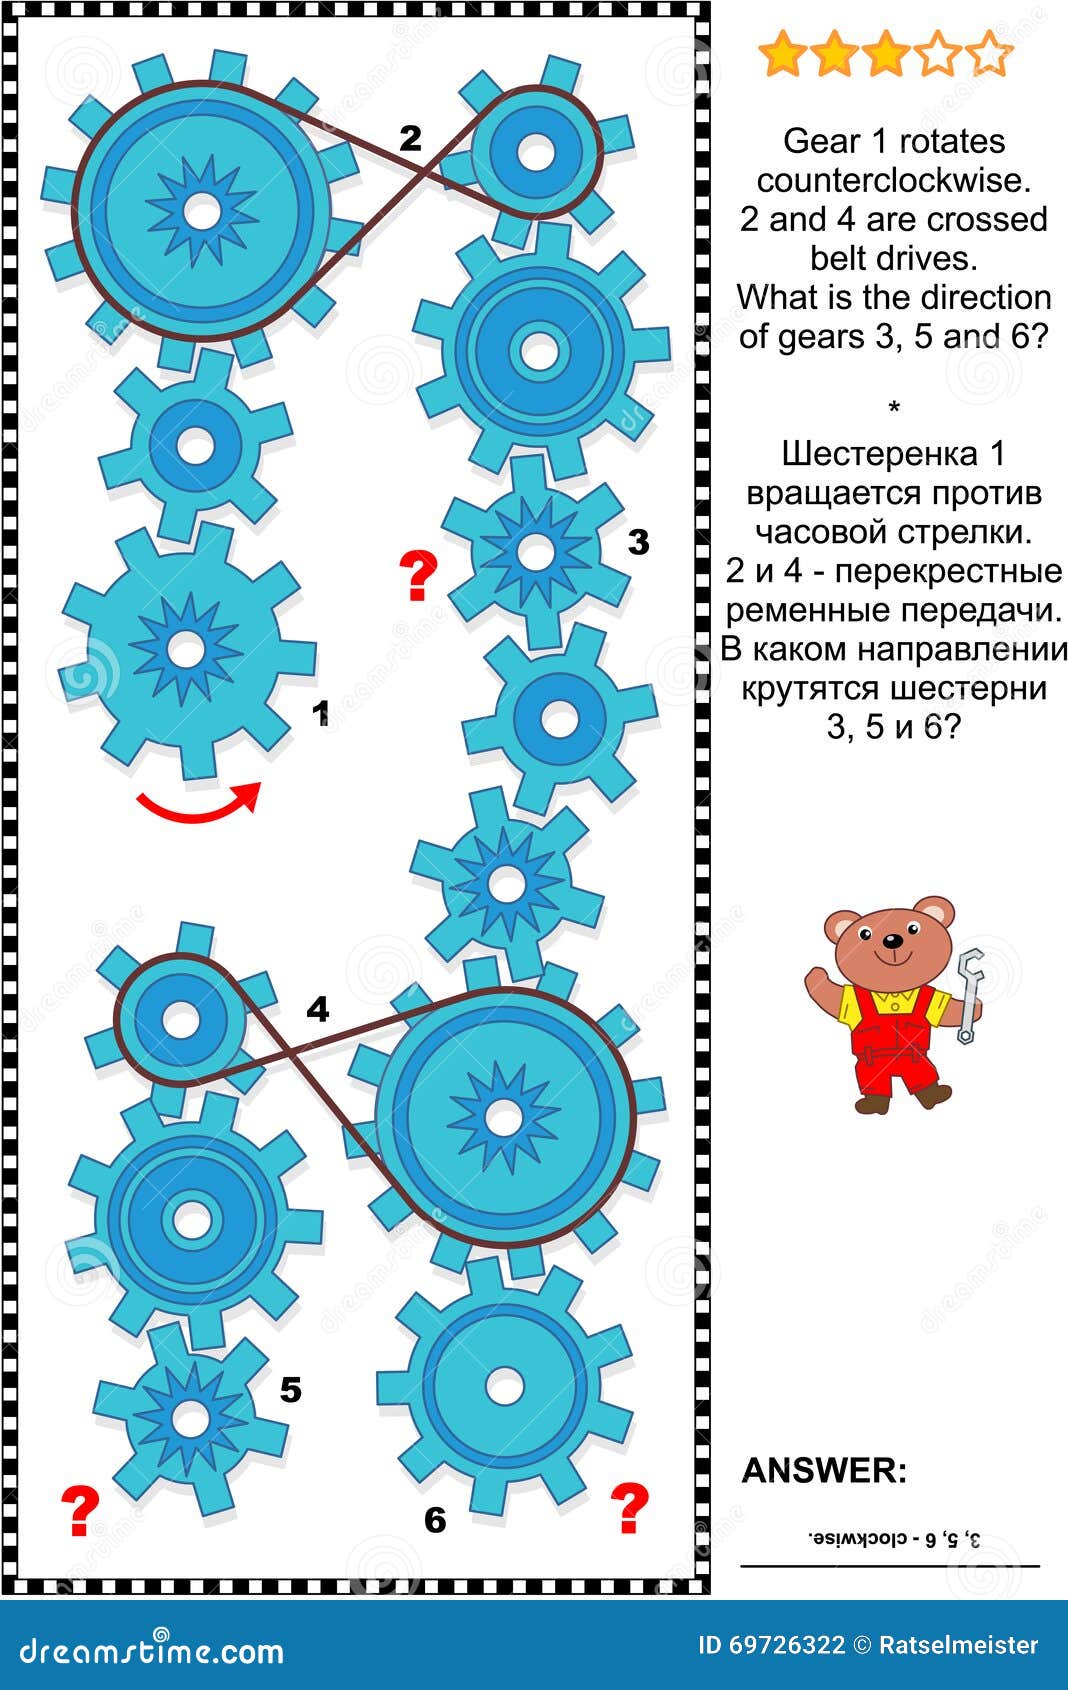 visual puzzle with rotating gears and belt drives